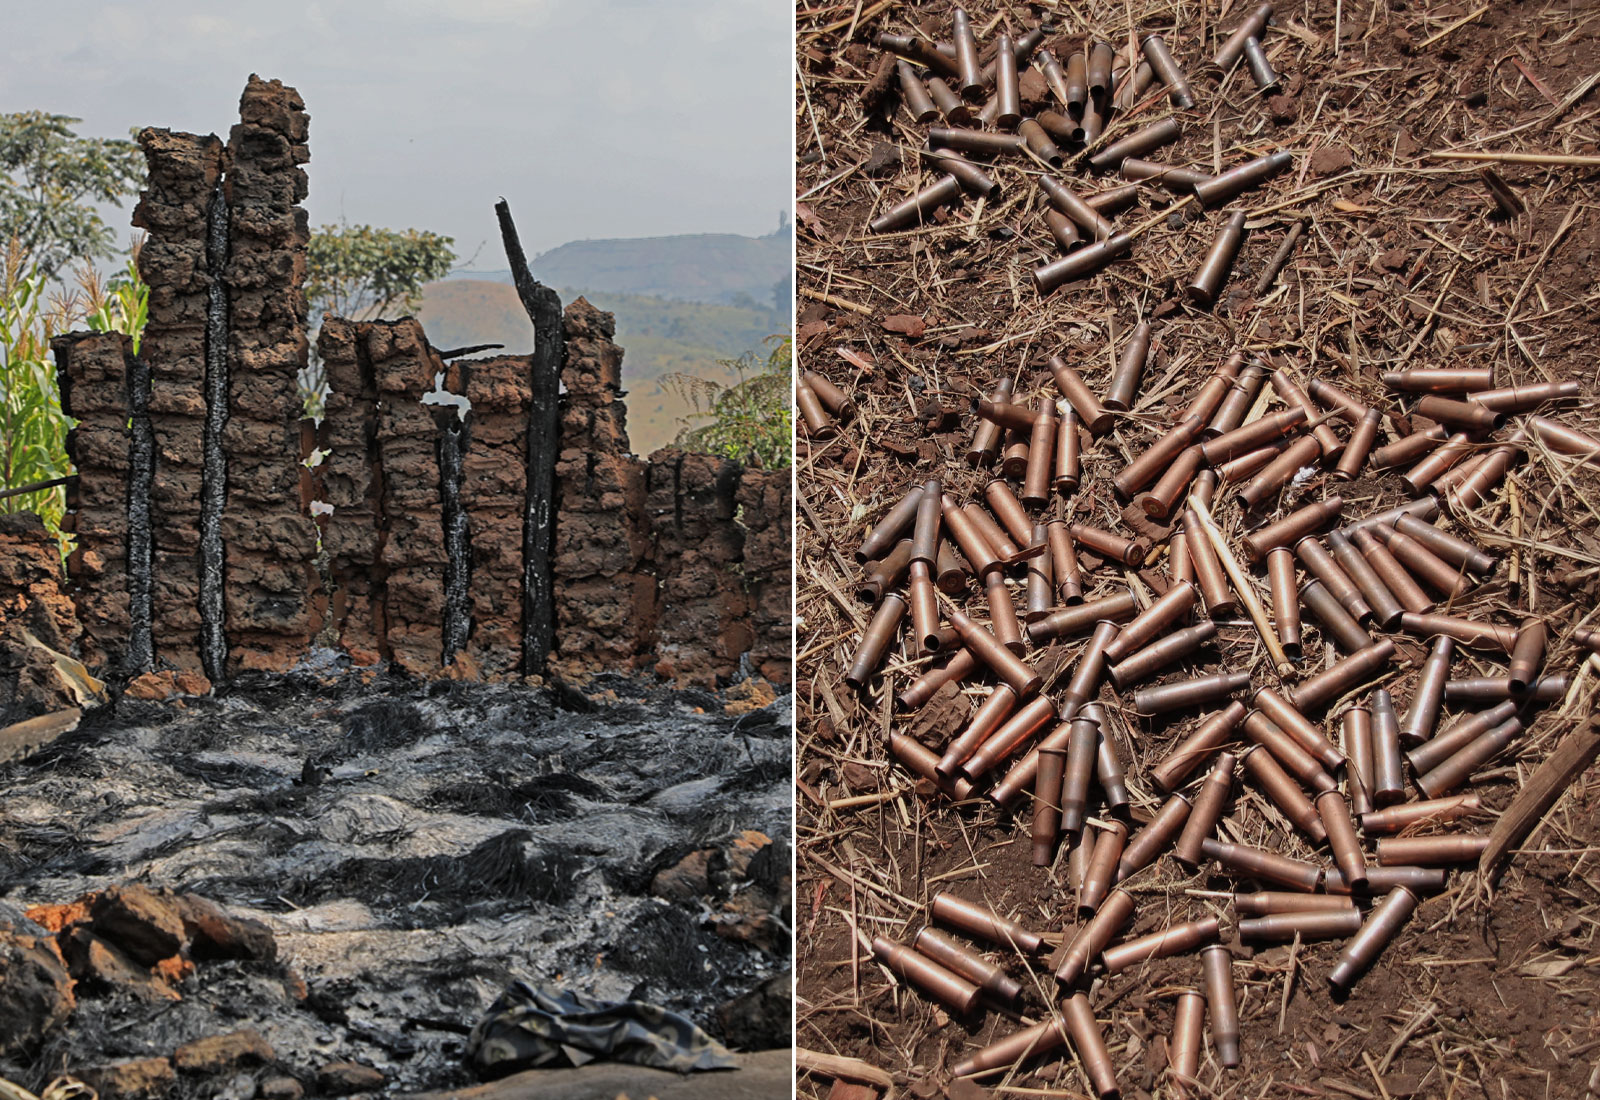 left: remains of a wall of a burnt down hut, right: many shell casings from bullets on dirt and straw covered groundashes and burnt debris on the ground